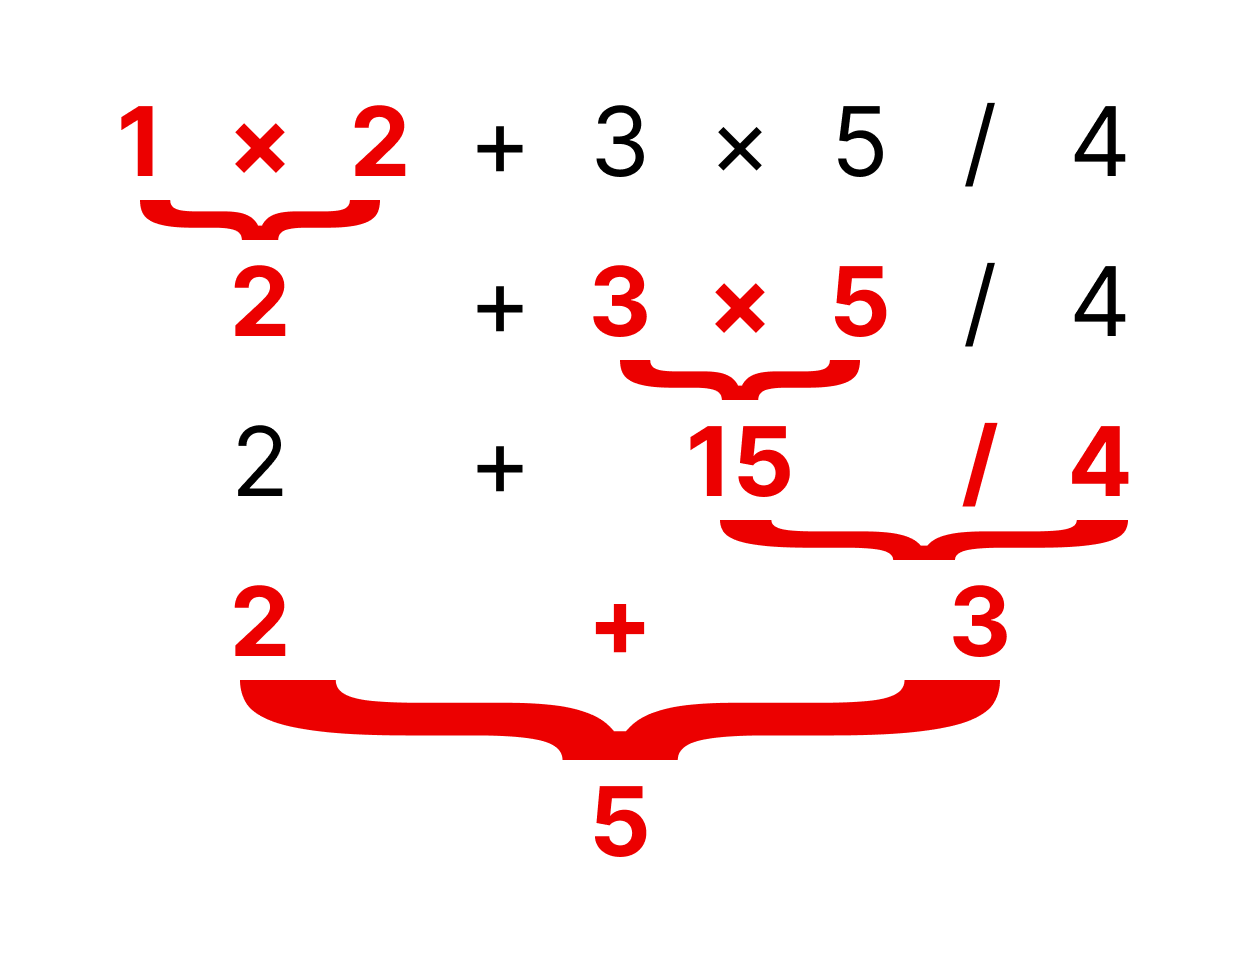 For the expression 1 times 2 plus 3 times 5 divided by 4, we start off by evaluating 1 times 2, which evaluates to 2, leaving us with the expression 2 plus three times 5 divided by 4. We then evaluate 3 times 5, which is 15, leaving us with the expression 2 plus 15 divided by 4. Then, we evaluate 15 divided by 4, which gives us 3, leaving us with the expression 2 plus 3, which evaluates to 5.